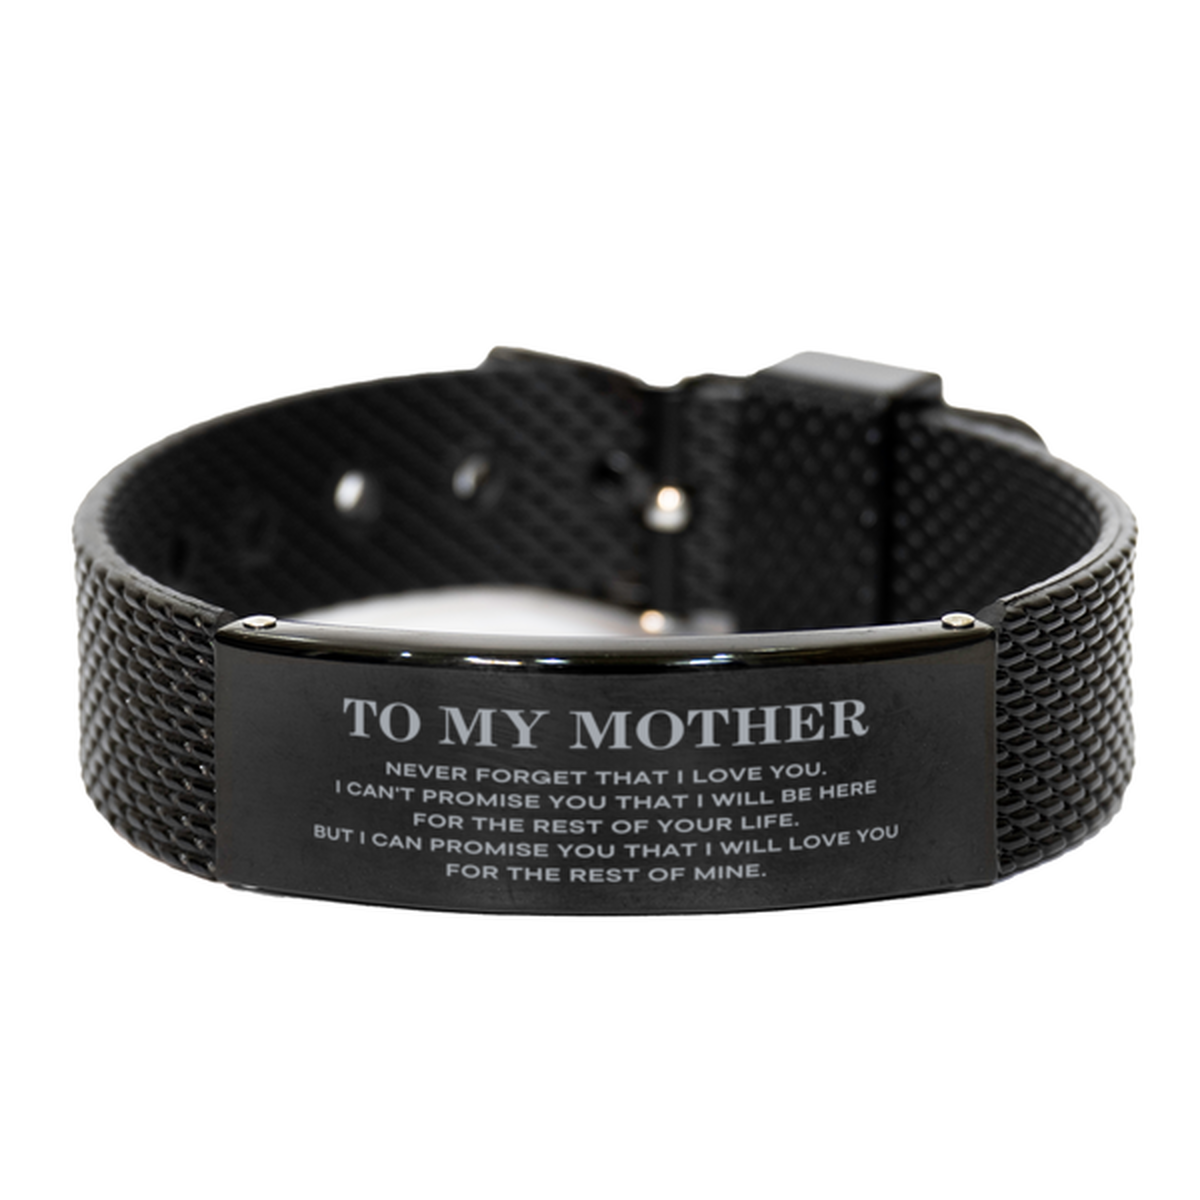 To My Mother Gifts, I will love you for the rest of mine, Love Mother Bracelet, Birthday Christmas Unique Black Shark Mesh Bracelet For Mother